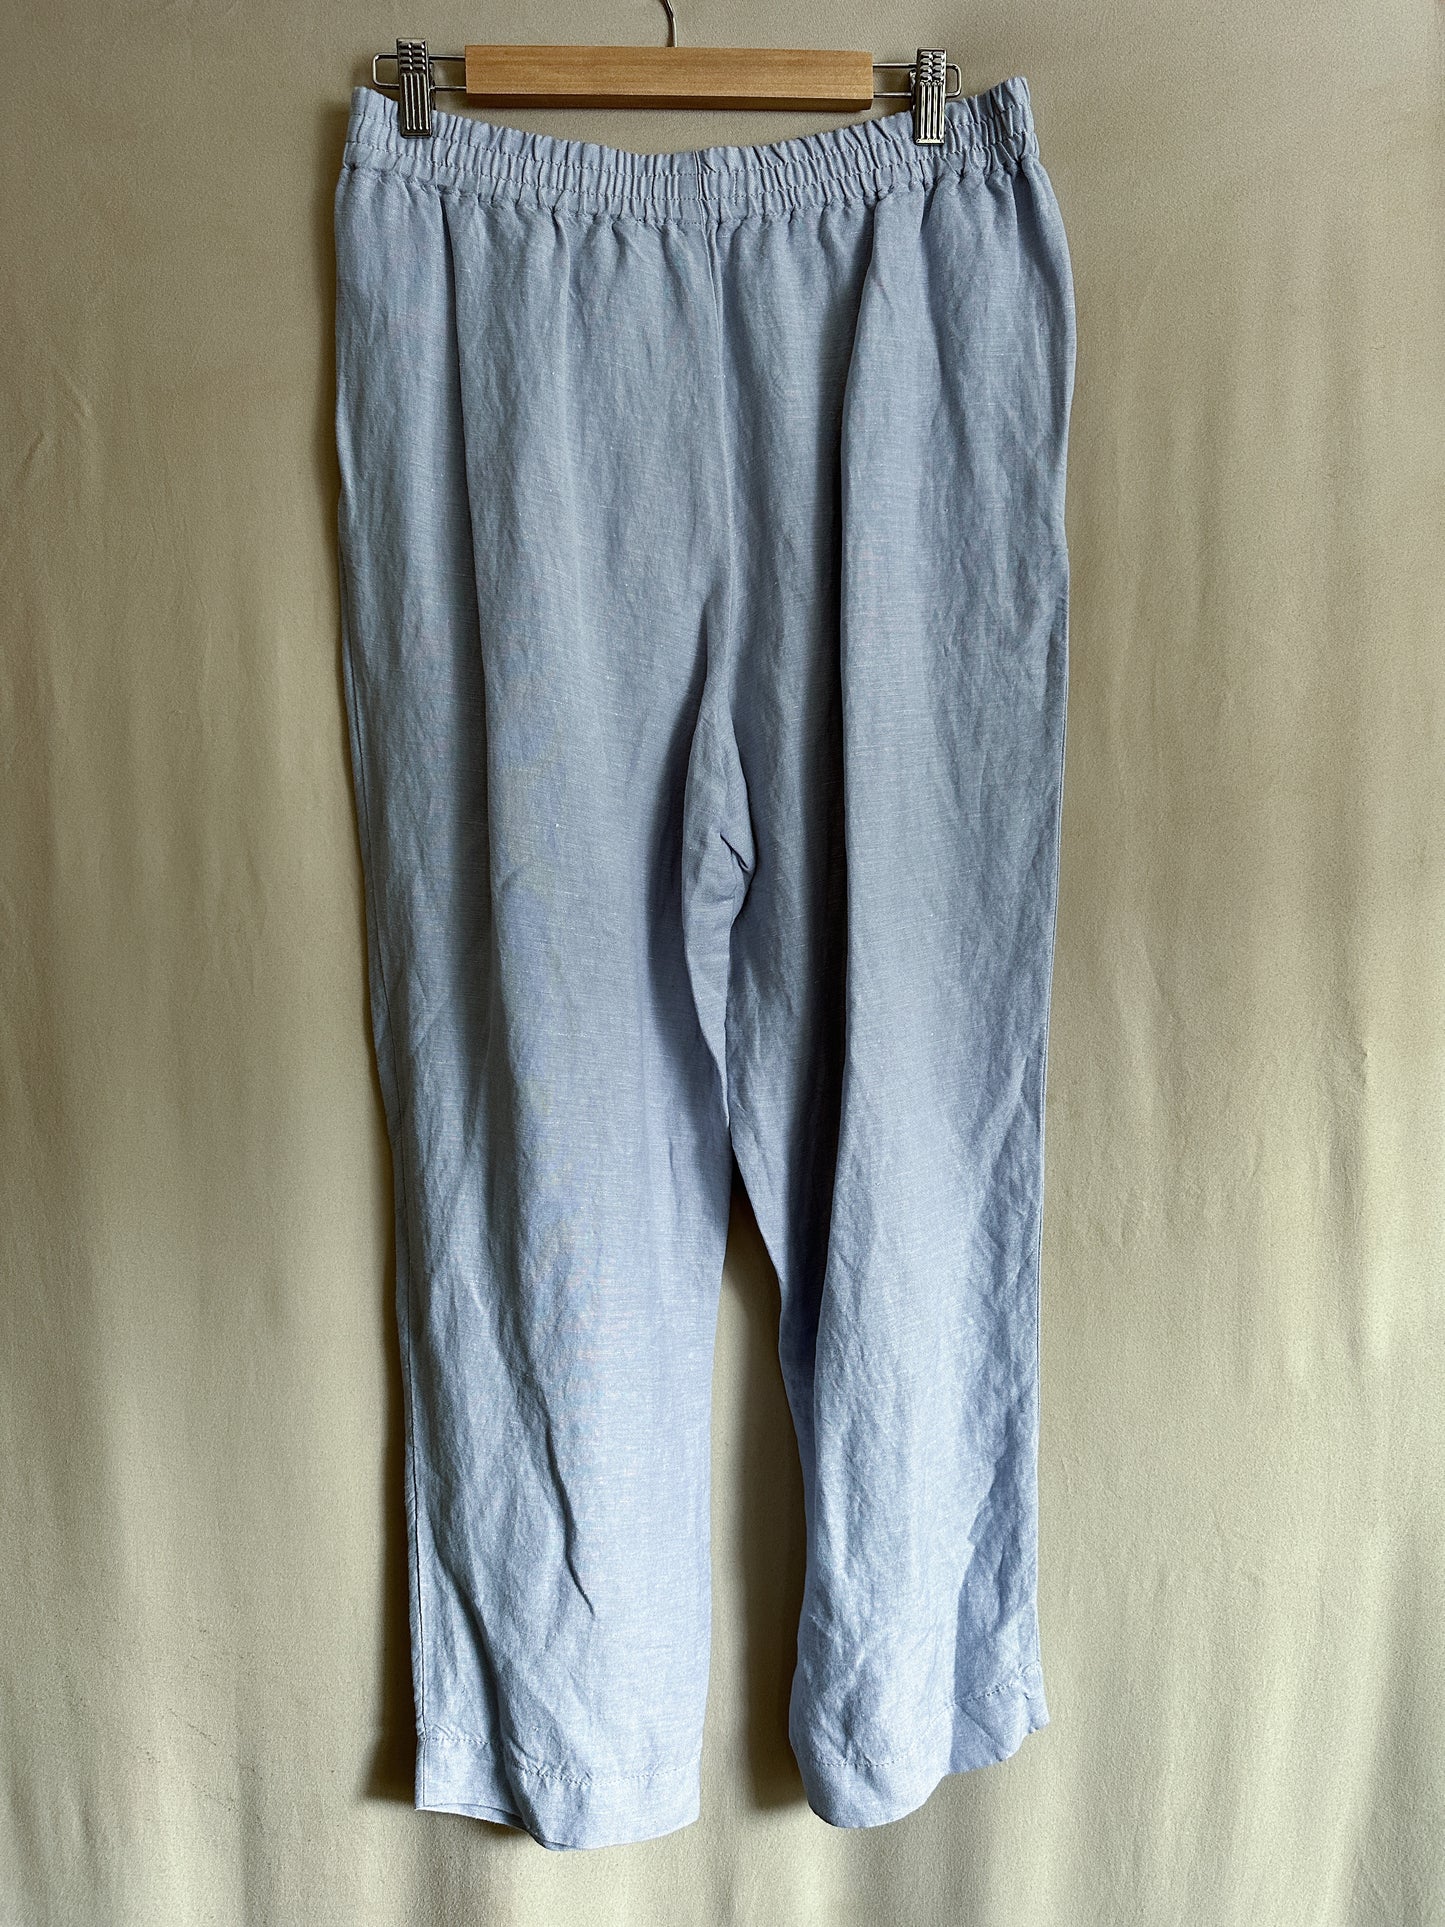 Madewell Blue Linen Blend Pull-on Pants (size M)